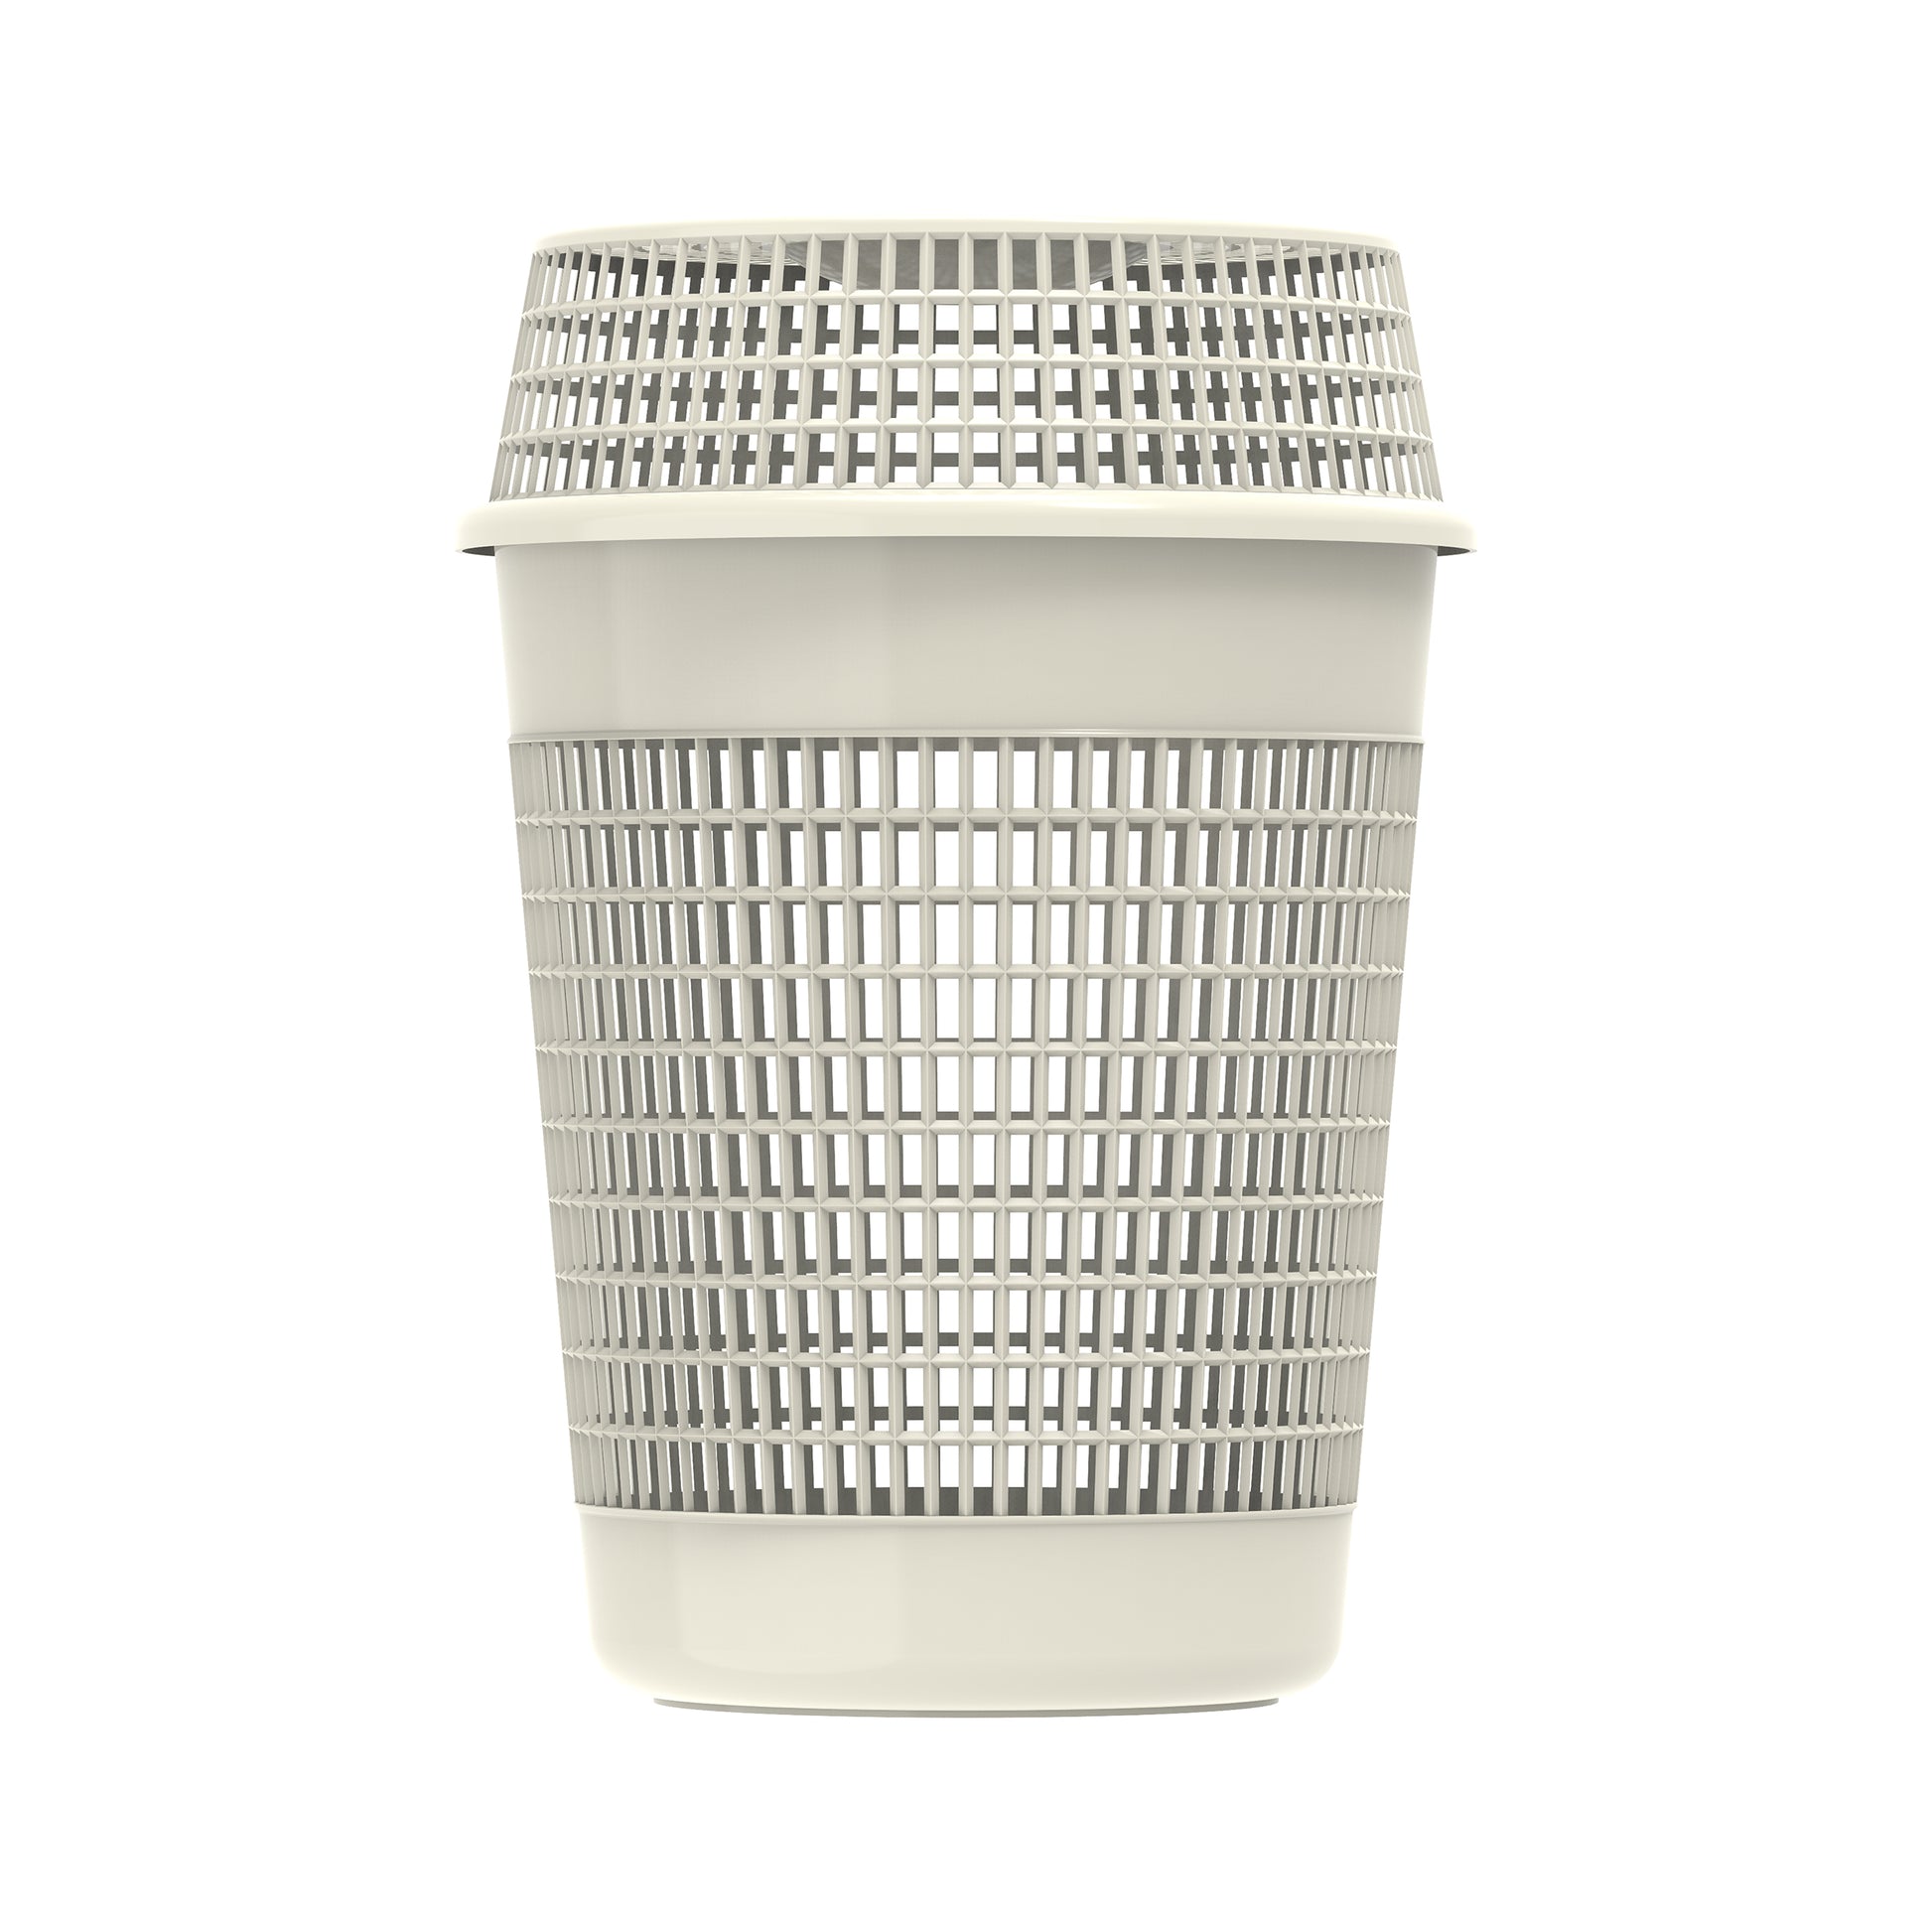 Tall Laundry Basket with Lid from Cosmoplast Kuwait.